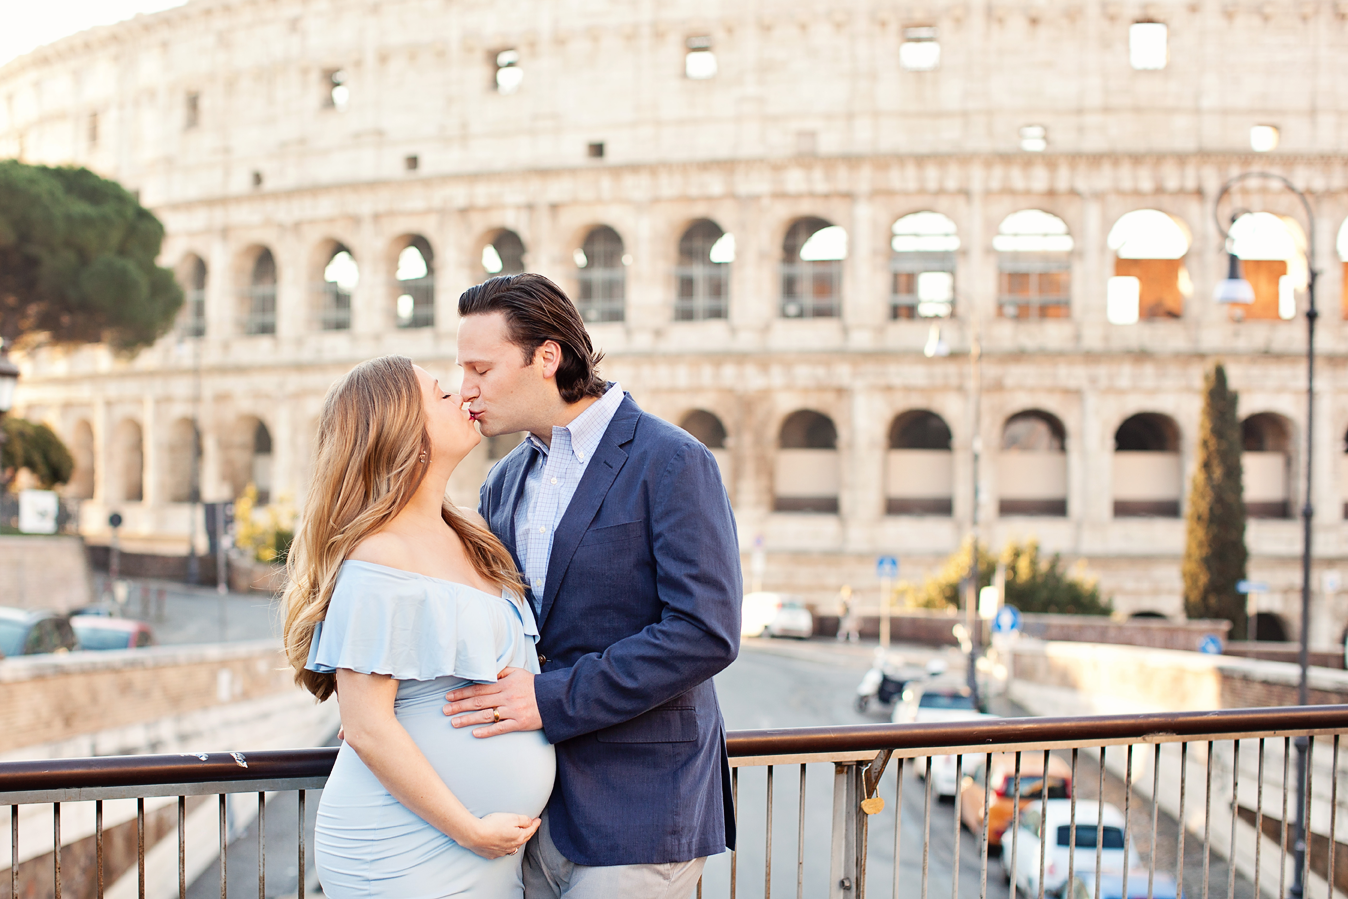 Honeymoon, vacation, family, engagement, maternity, wedding, love story individual and solo photoshoots in Rome, Italy by photographer Tricia Anne Photography | Rome Photographer, vacation, tripadvisor, instagram, fun, married, bride, groom, love story, photography session rome, photoshoot rome, Rome babymoon photoshoot, vacation photographer, engagement photo, maternity photoshoot, rome honeymoon, rome wedding, elopement in Rome, honeymoon photographer rome